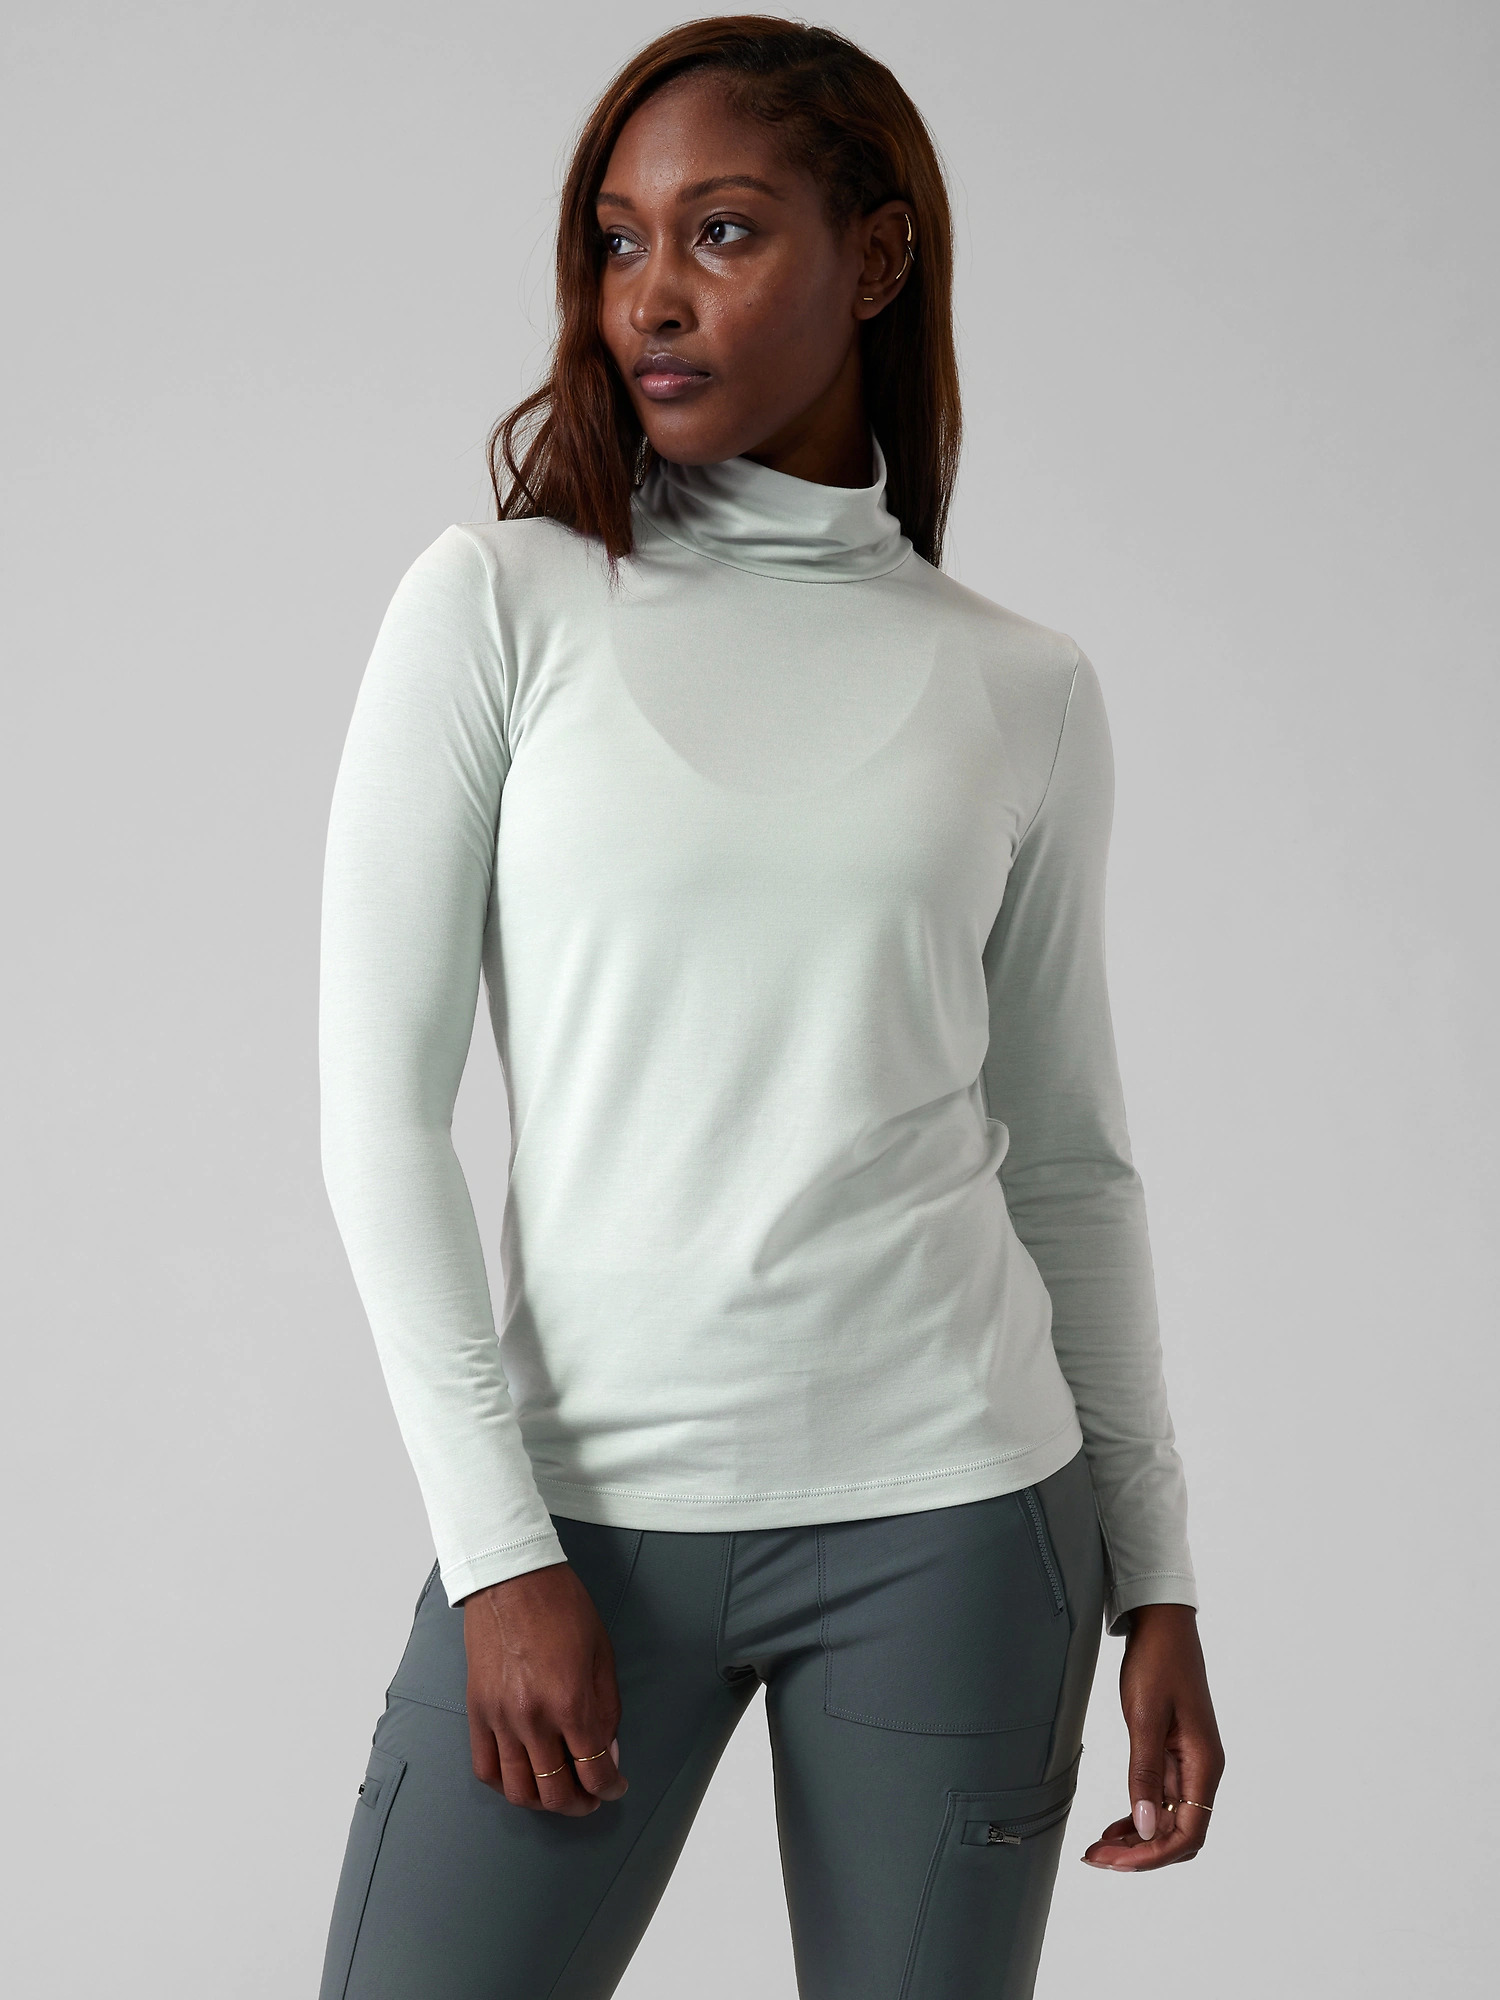 Athleta: Up to 50% Off Sale, Essential Turtleneck $15.99 + Free Shipping on $50+